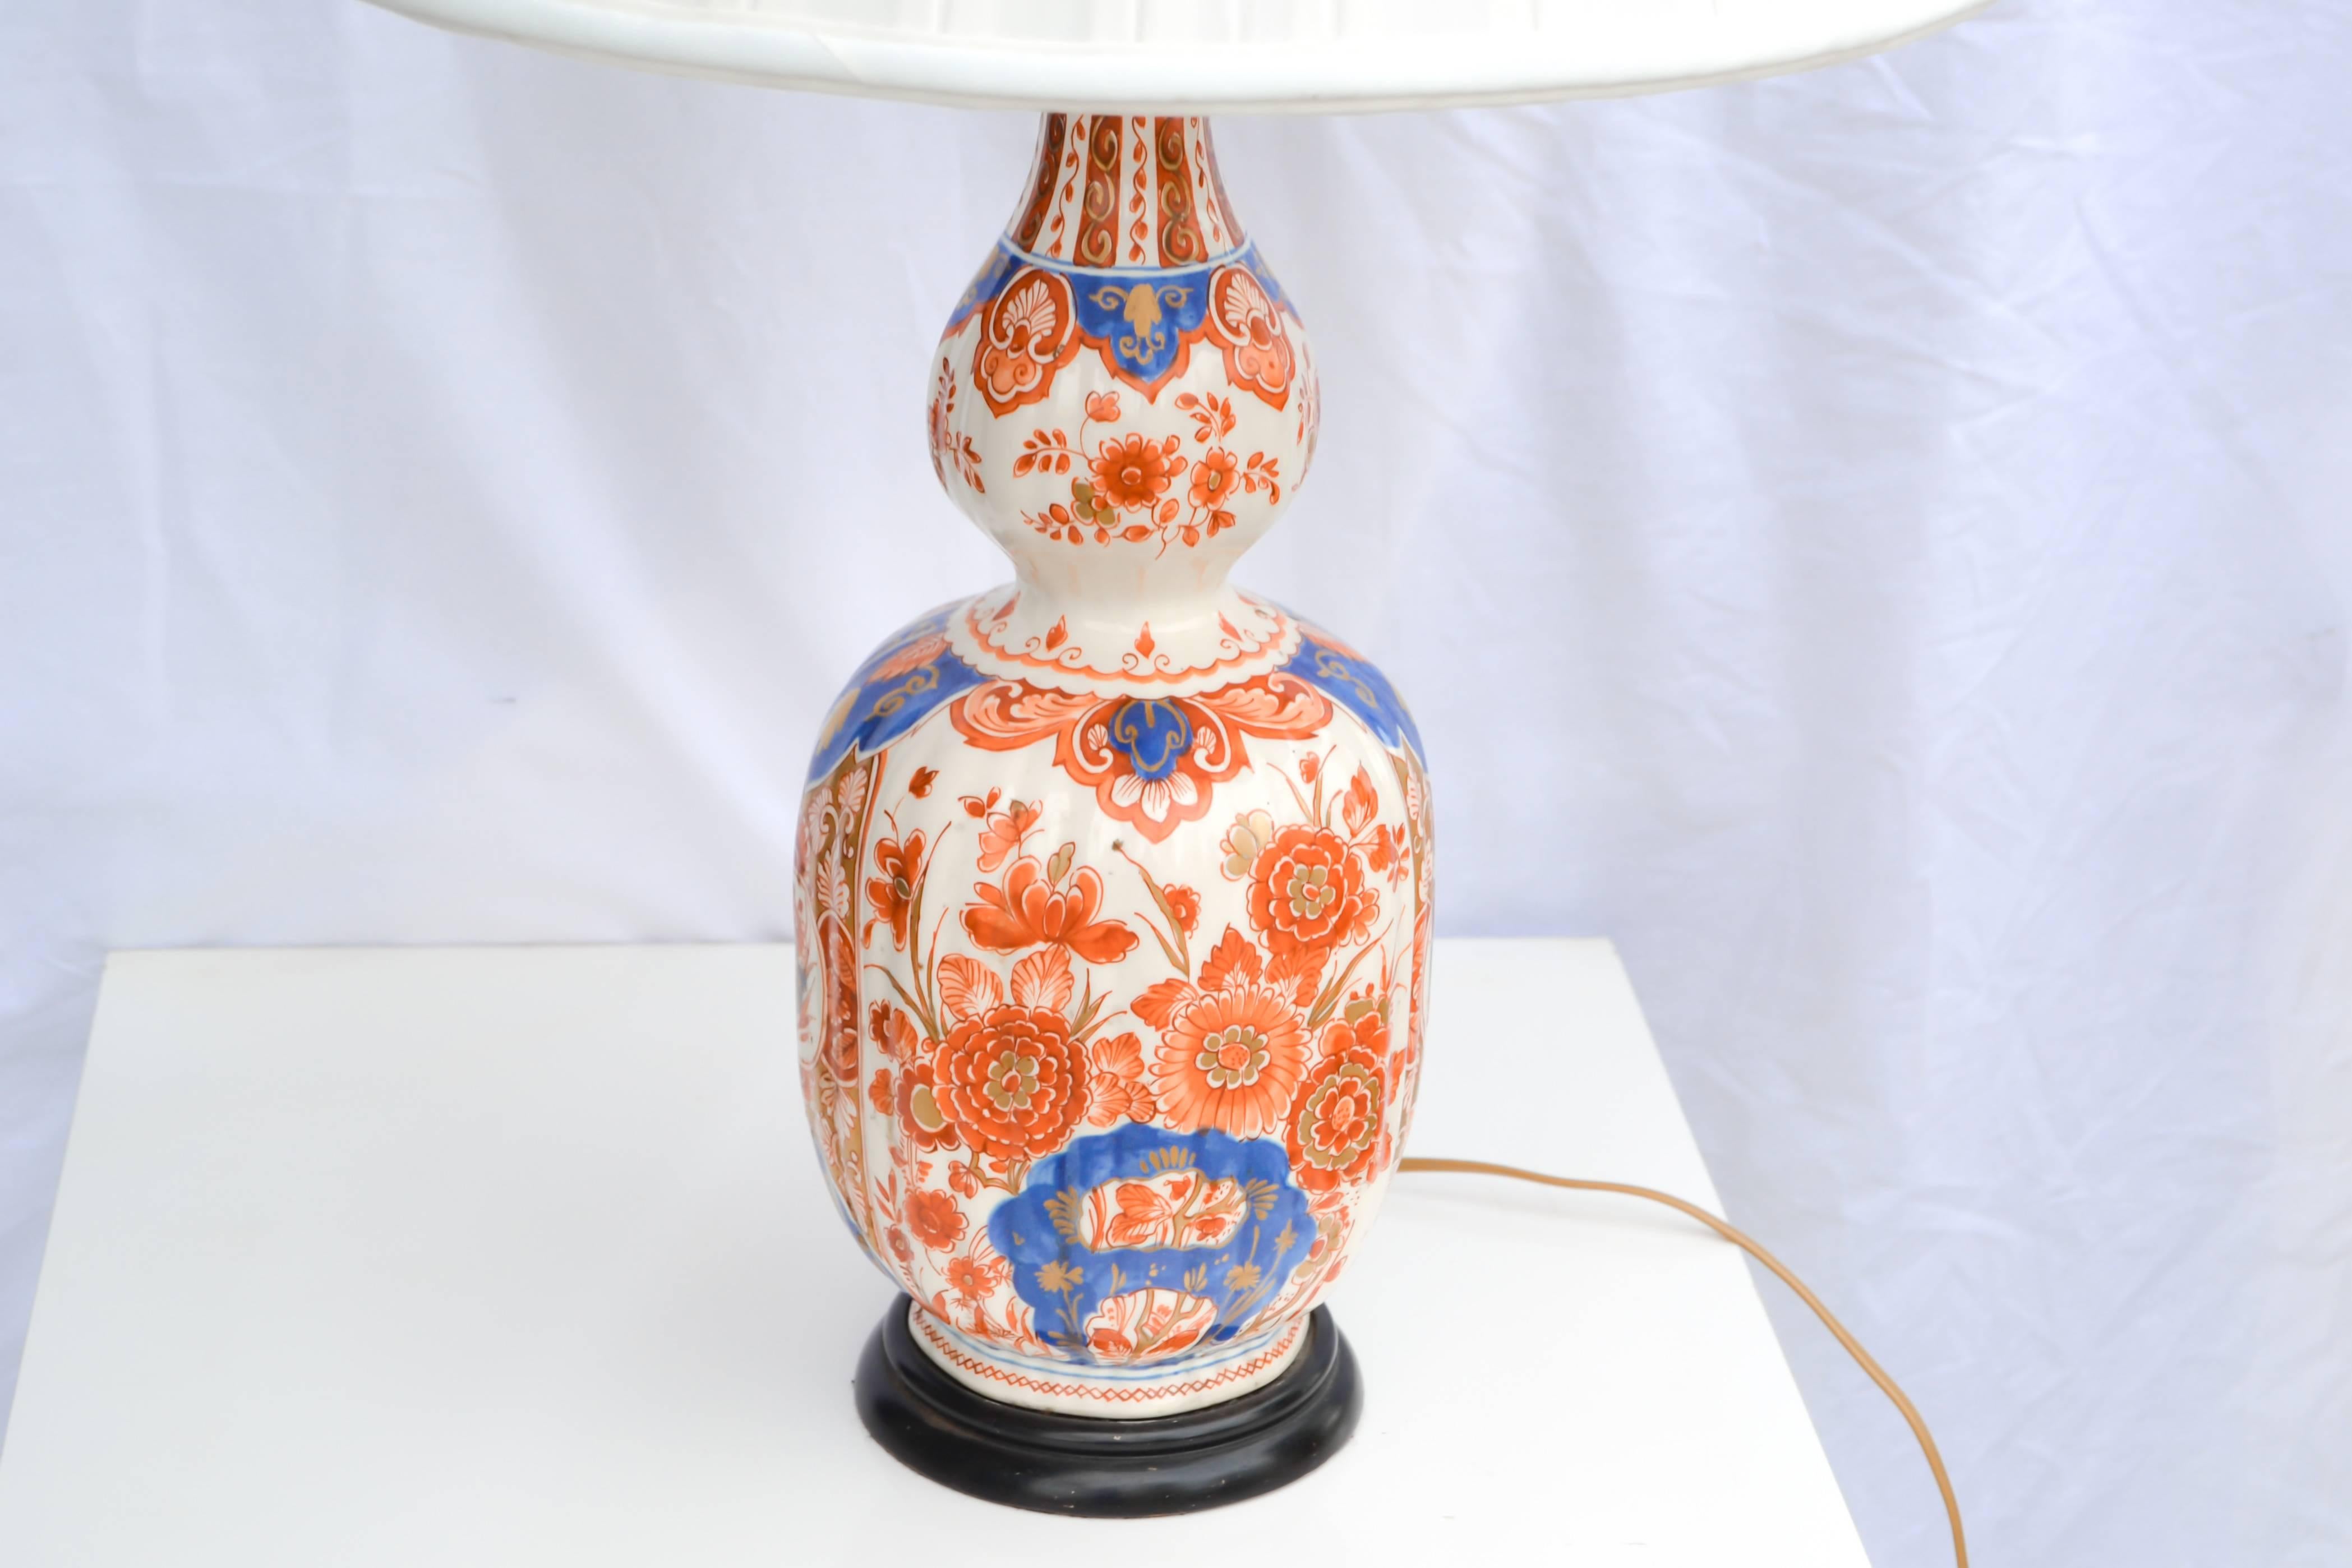 Delft style lamp in the Imari taste, double gourd form ribbed body mounted on ebonized wood baes. Rewired.